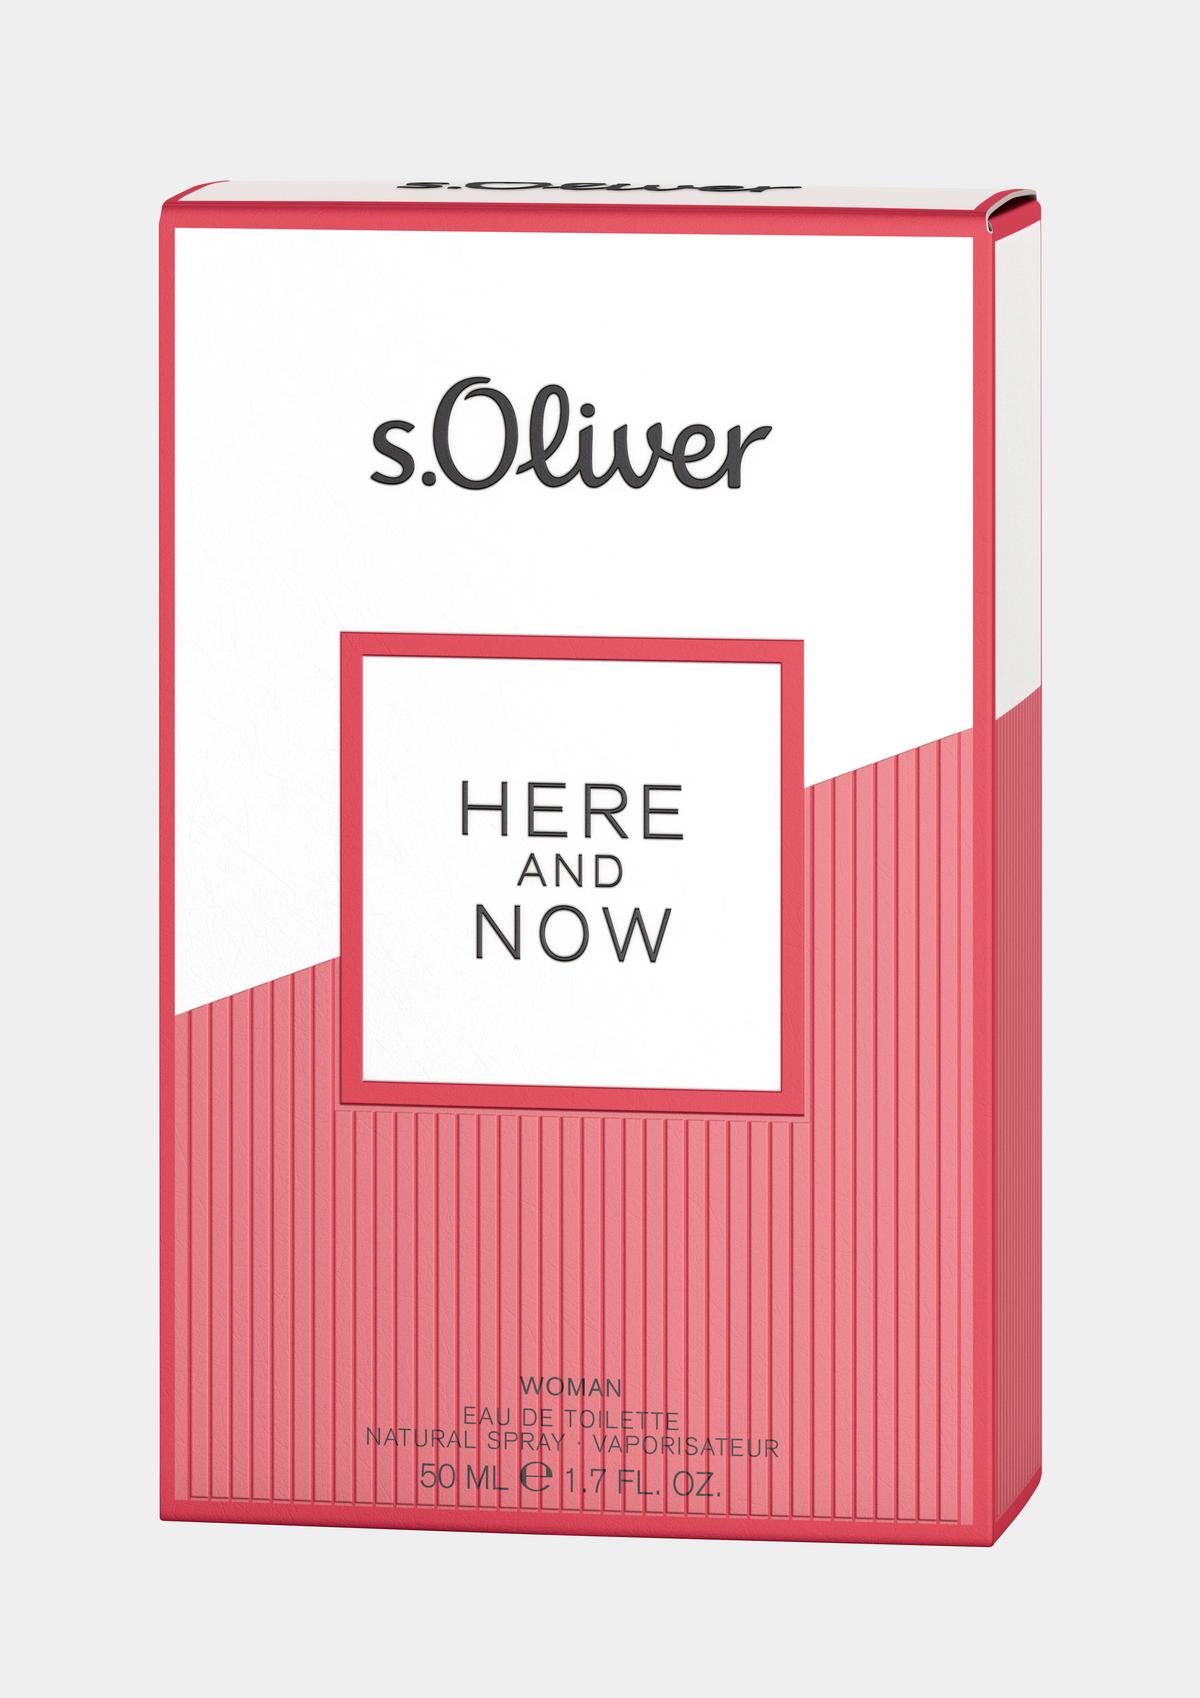 s.Oliver Toaletna voda Here And Now 50 ml